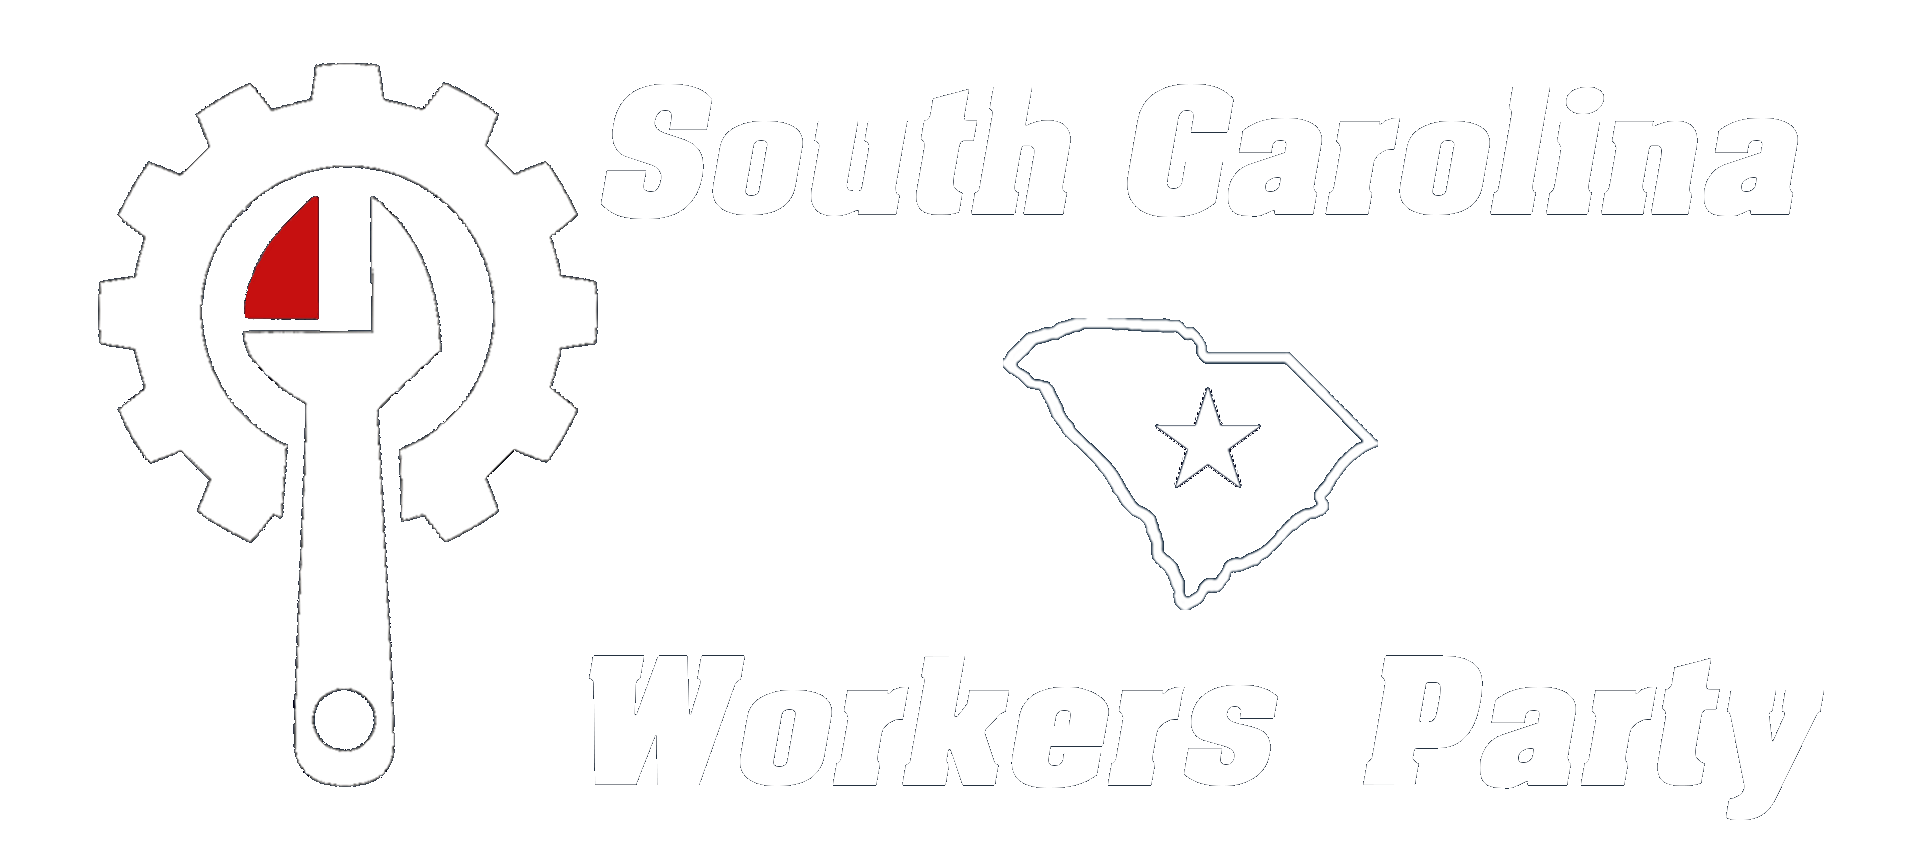 South Carolina Workers Party